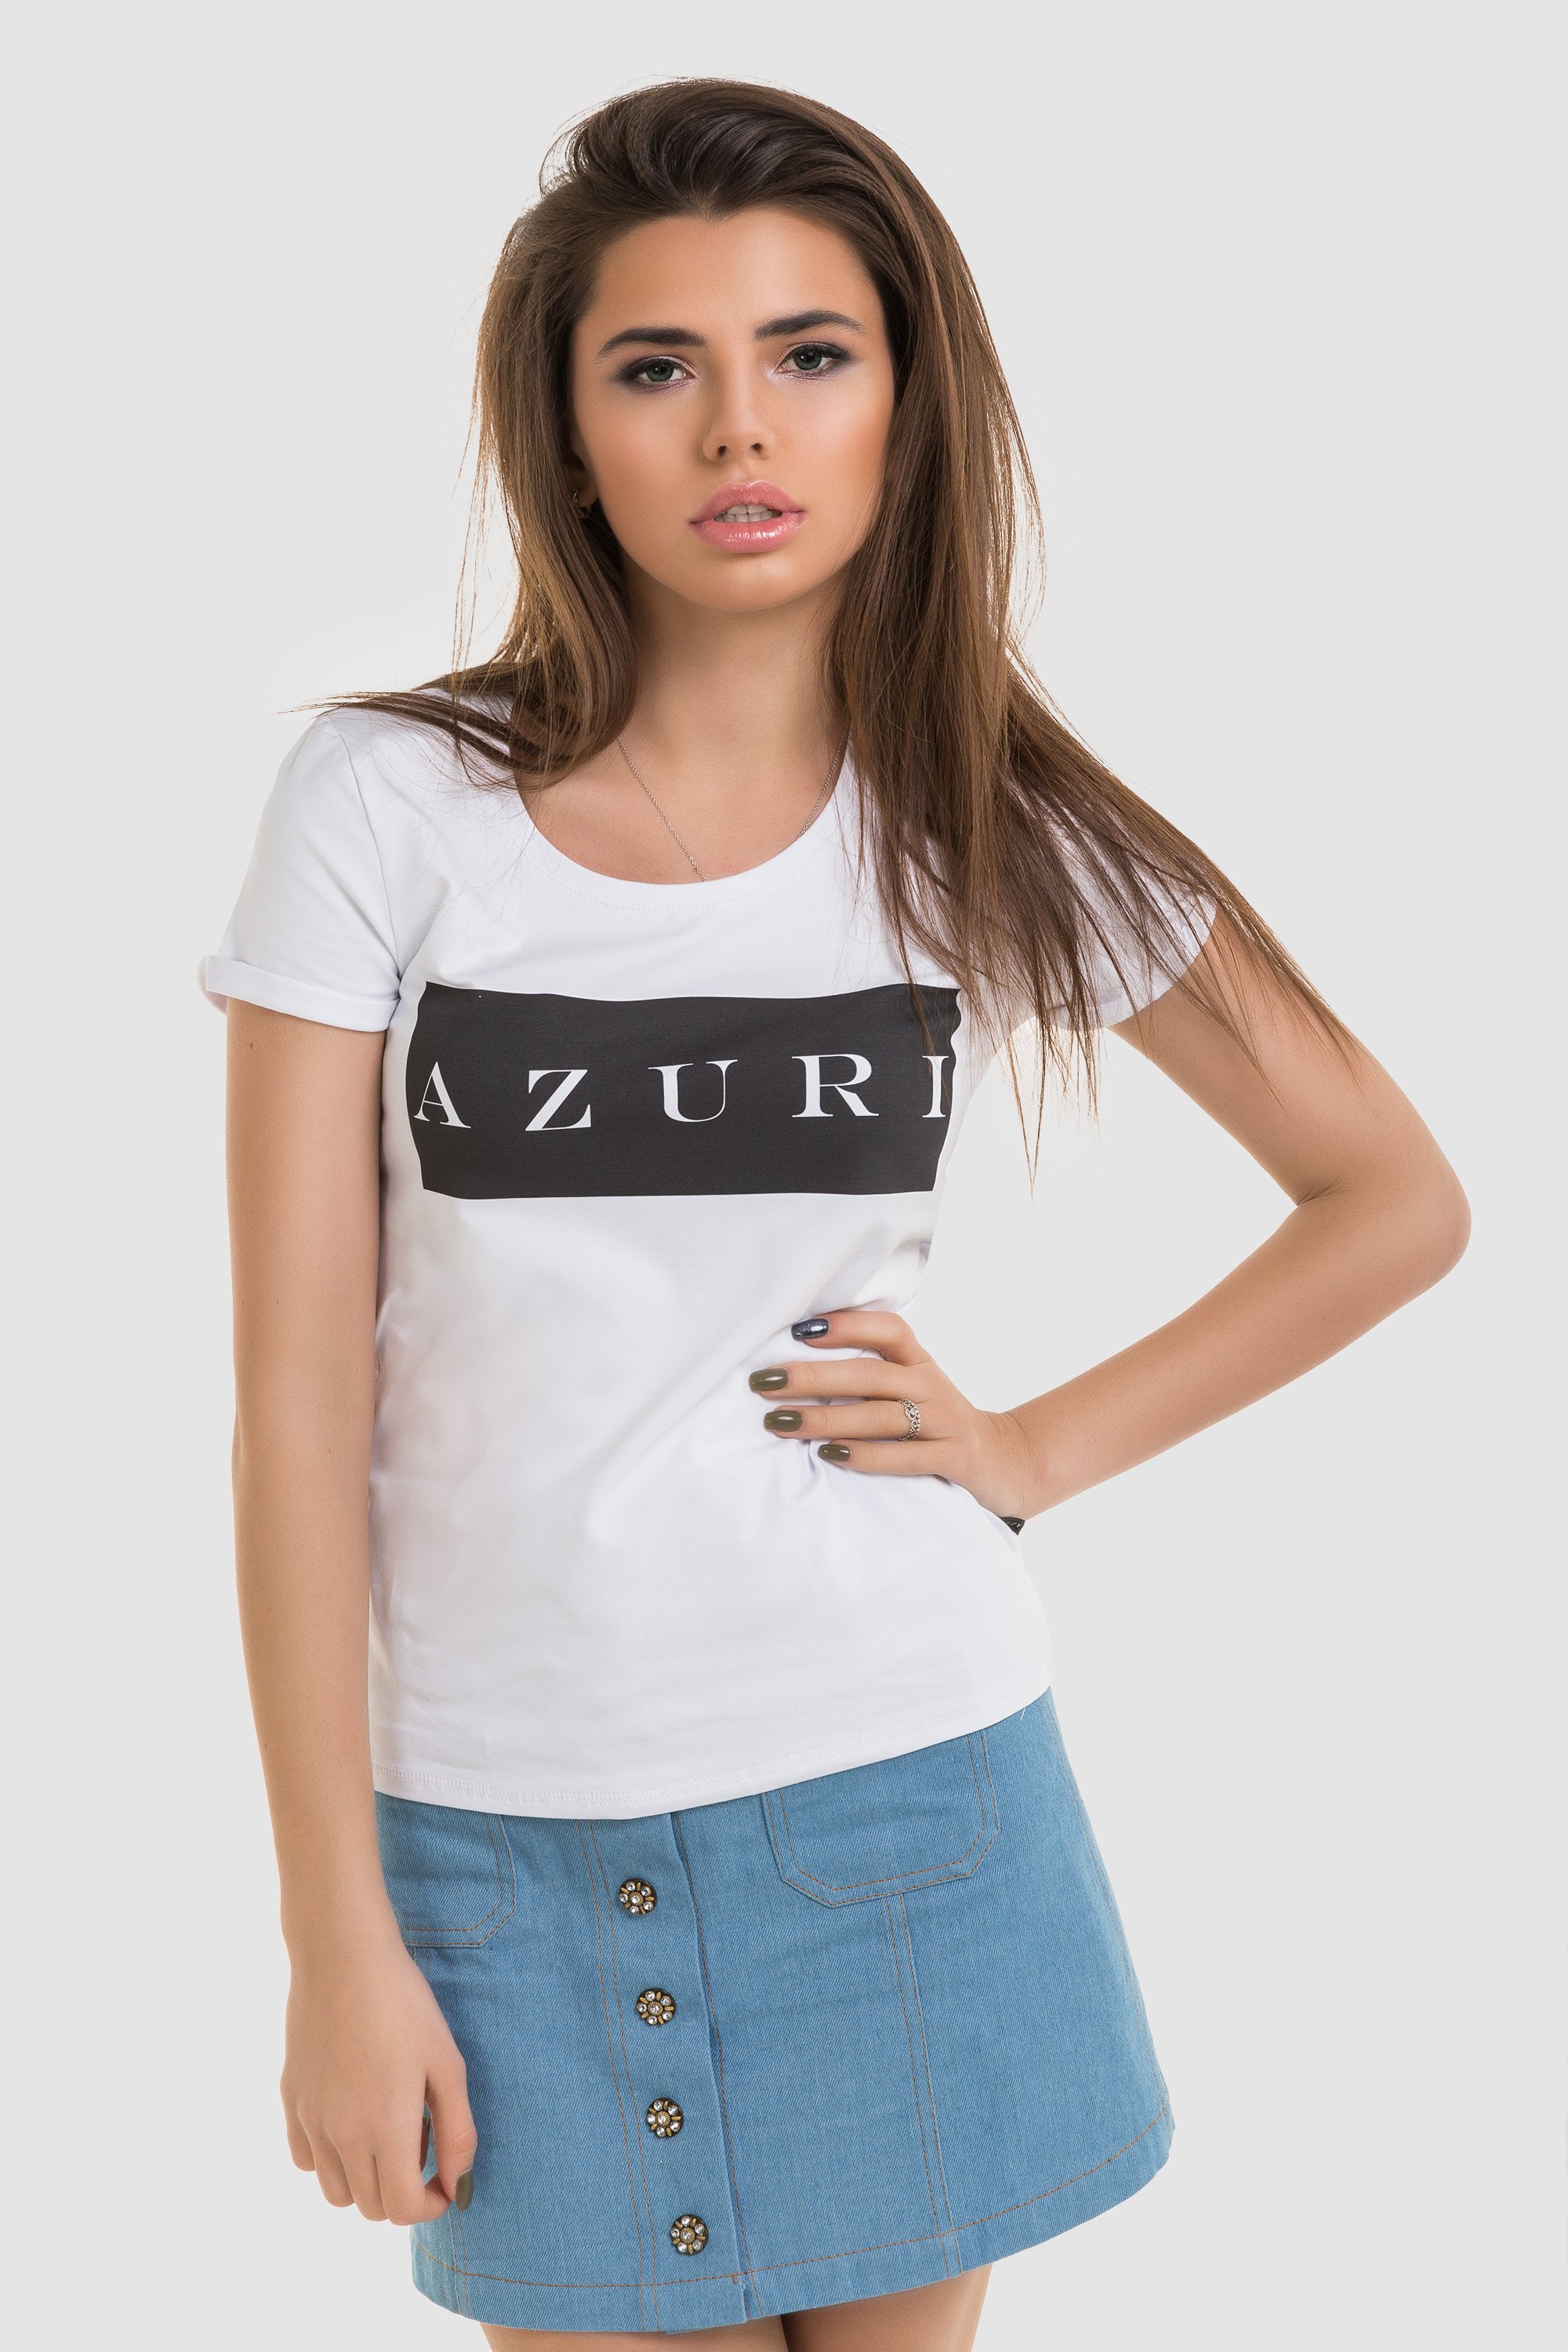 T-shirt with logo in white color